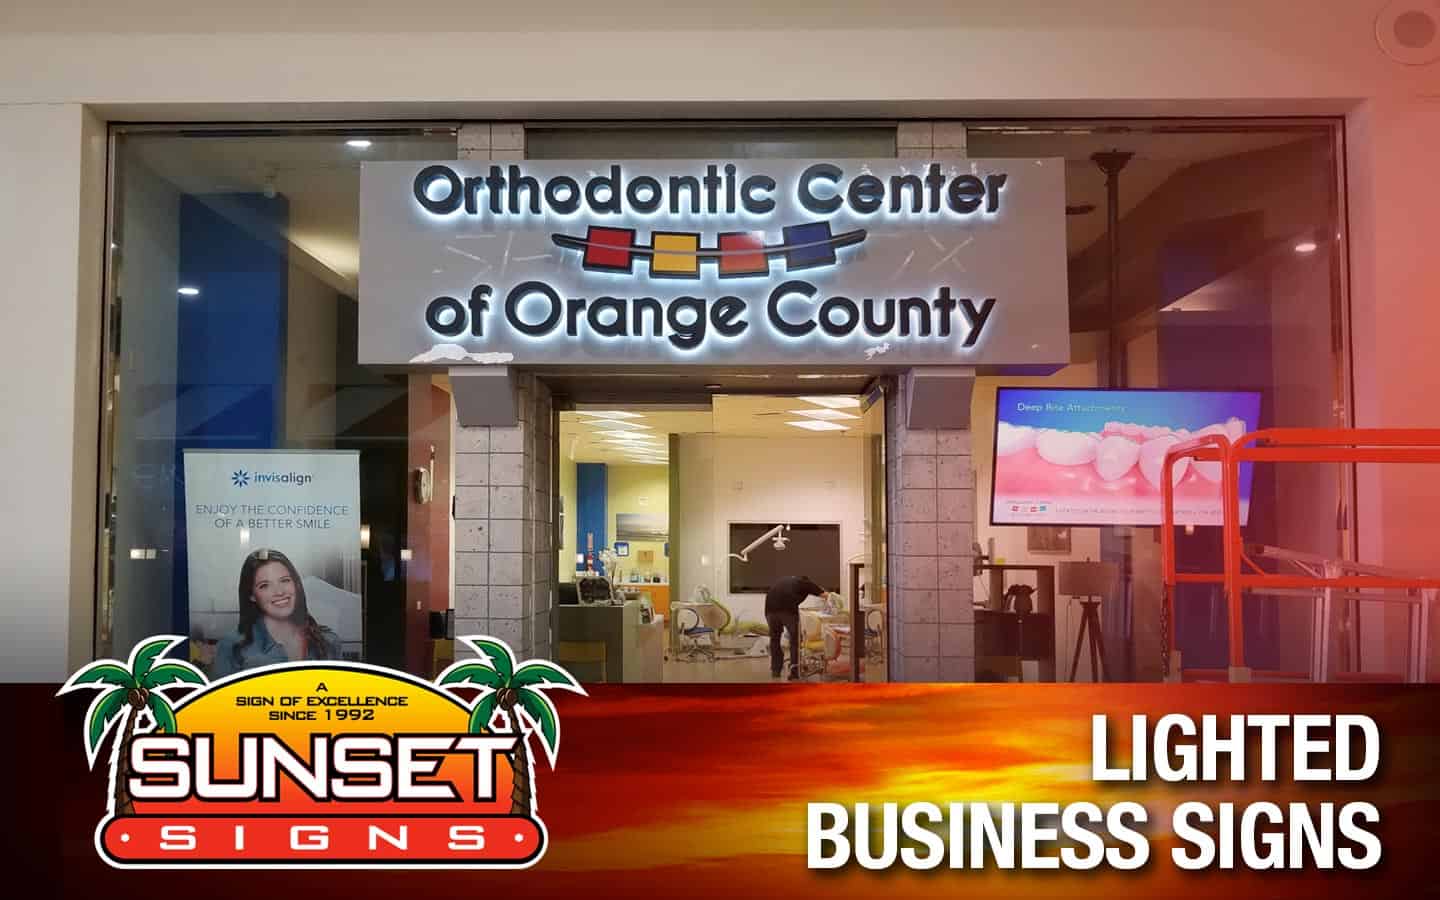 Lighted business signs